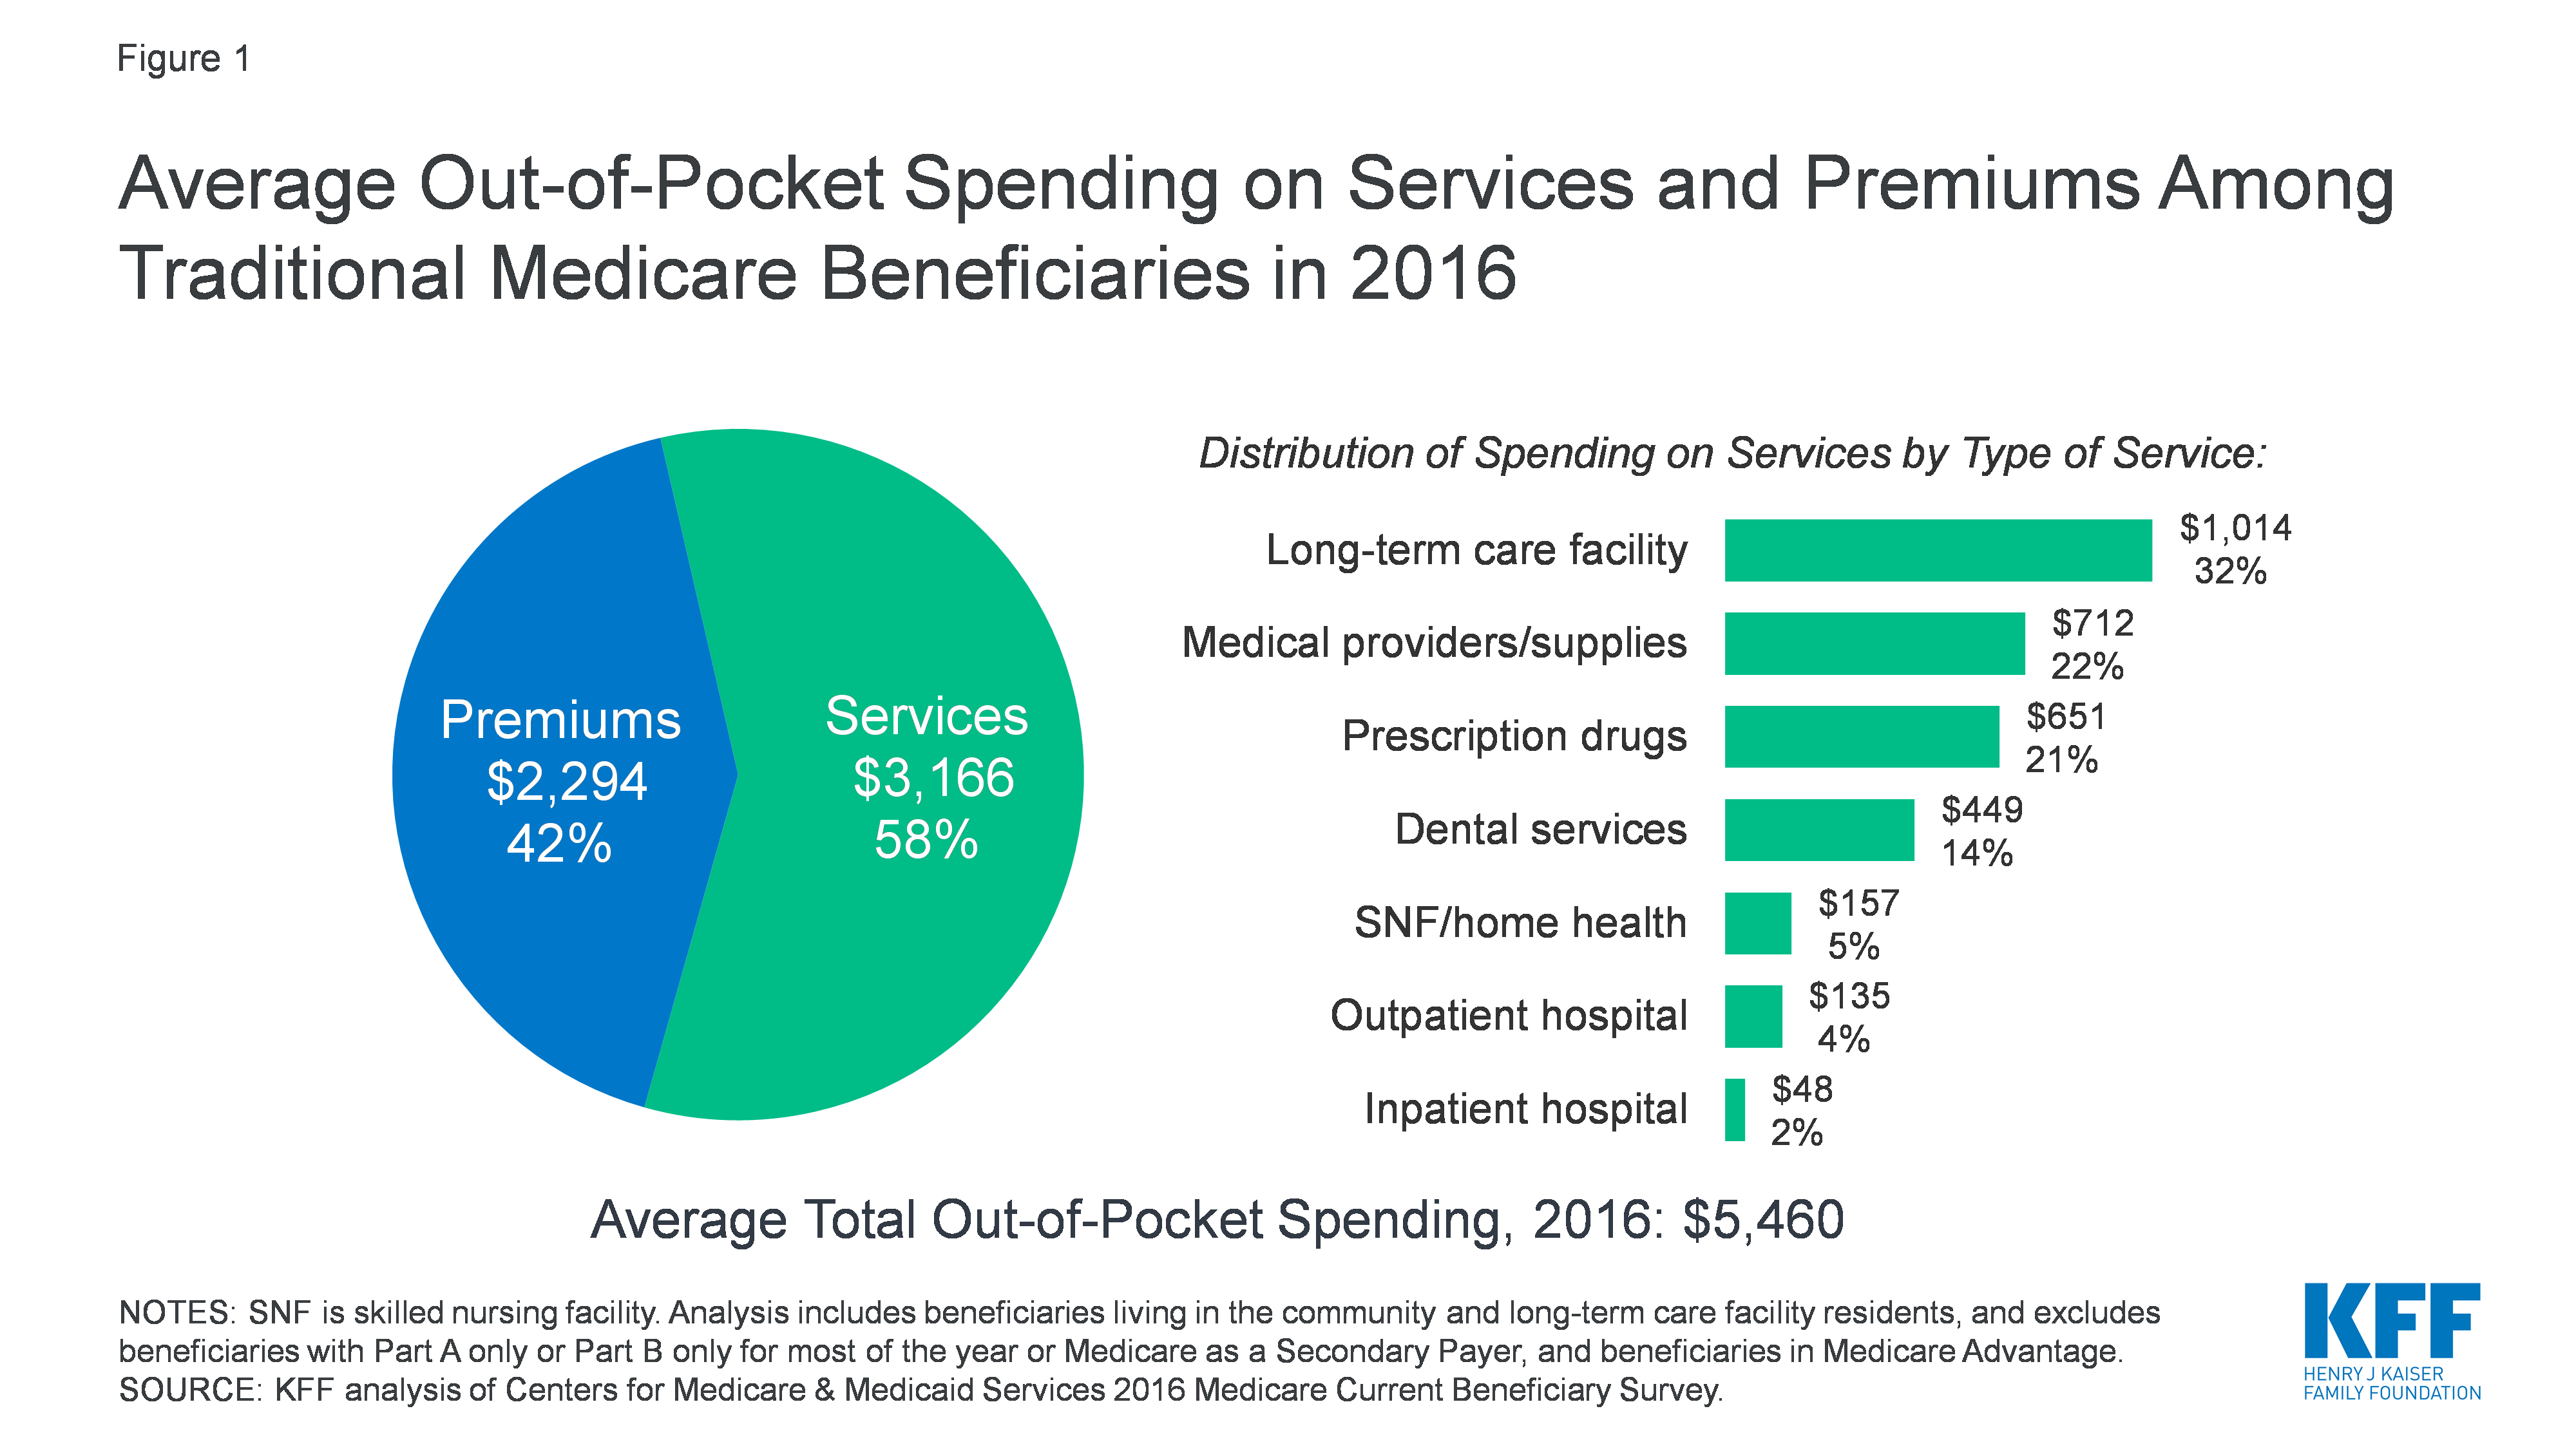 Average Out-of-Pocket Spending on Services and Premiums Among Traditional Medicare Beneficiaries in 2016